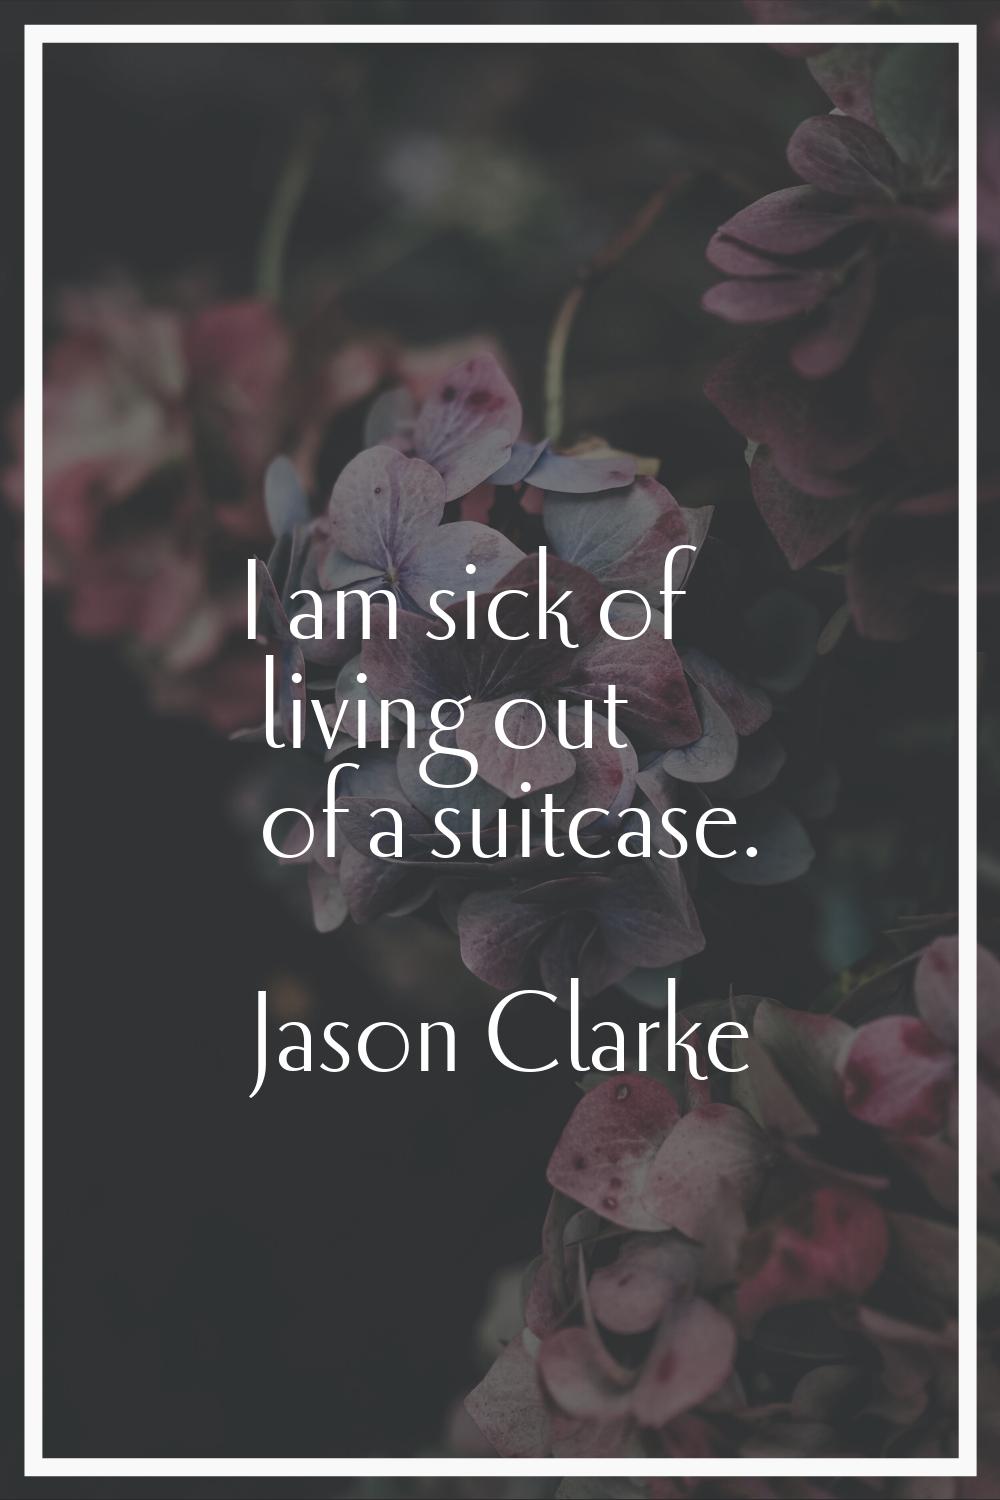 I am sick of living out of a suitcase.